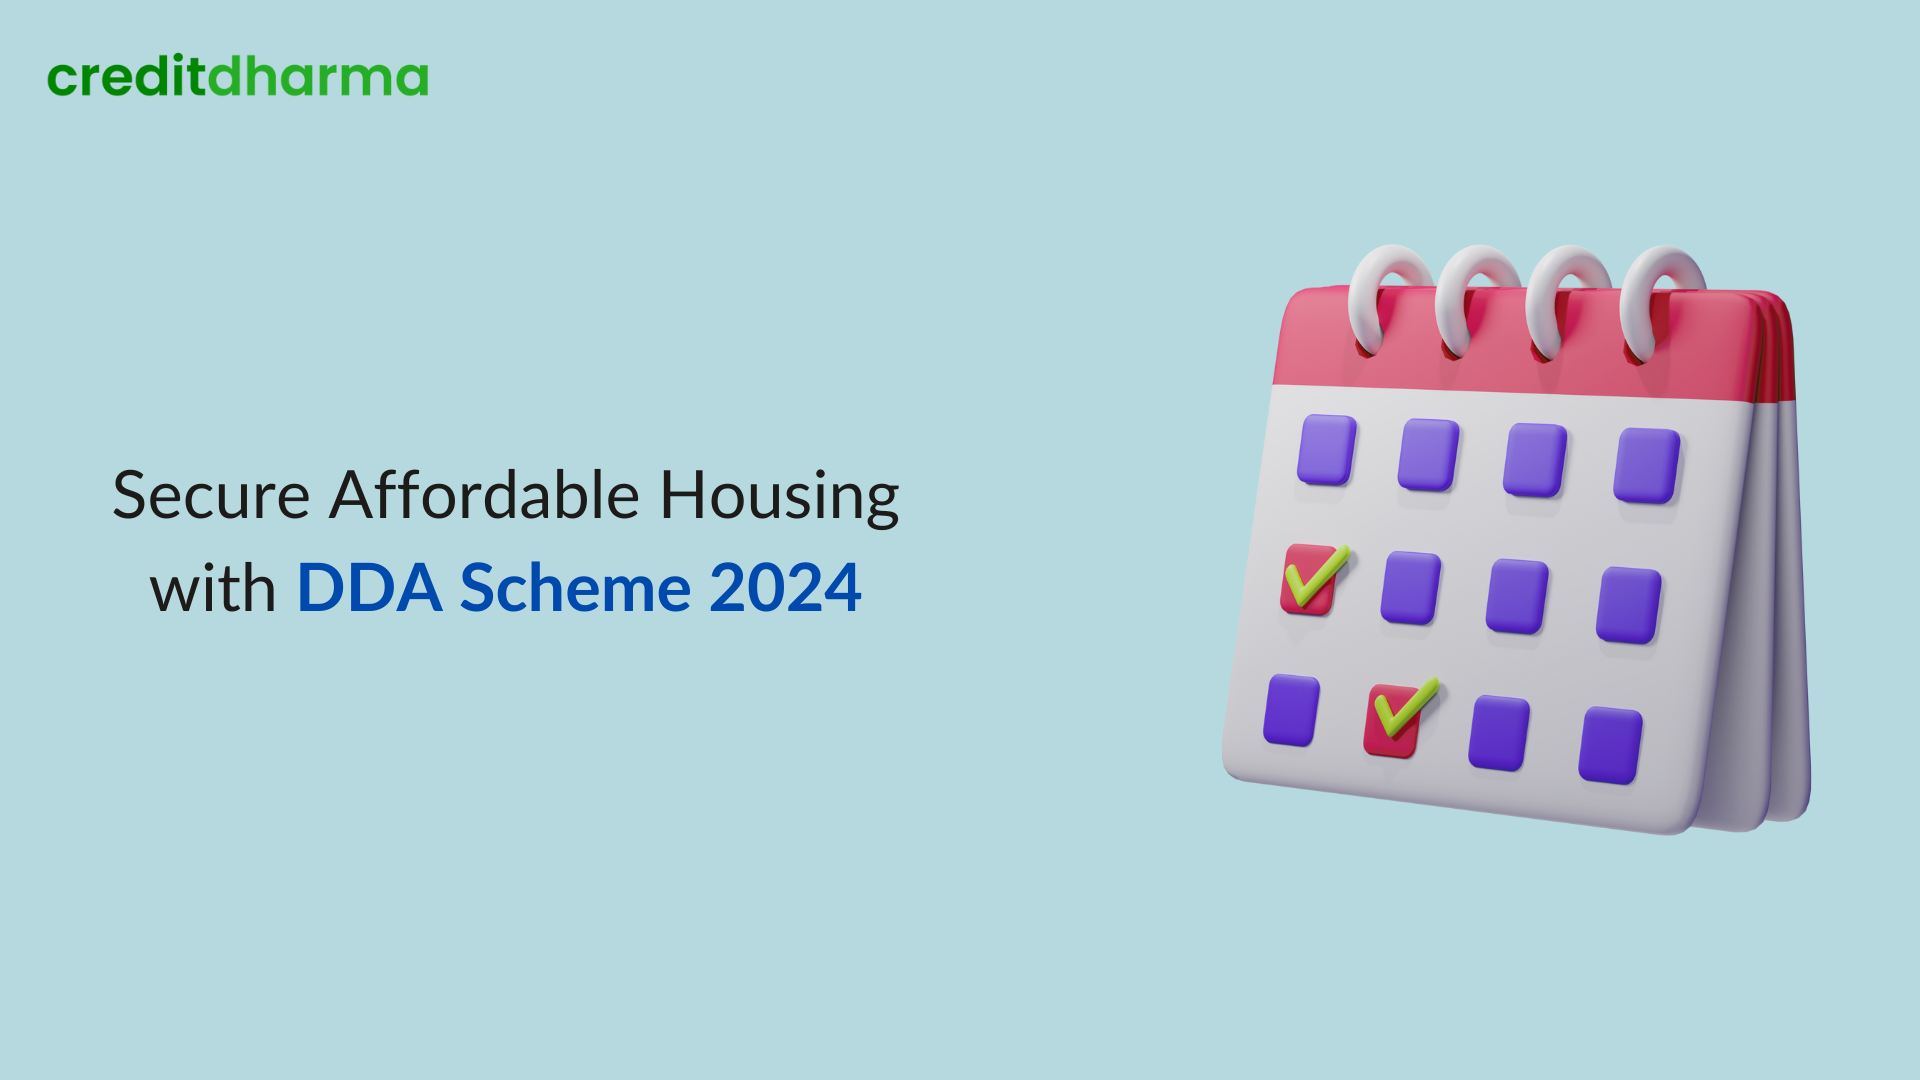 Secure Affordable Housing with DDA Scheme 2024